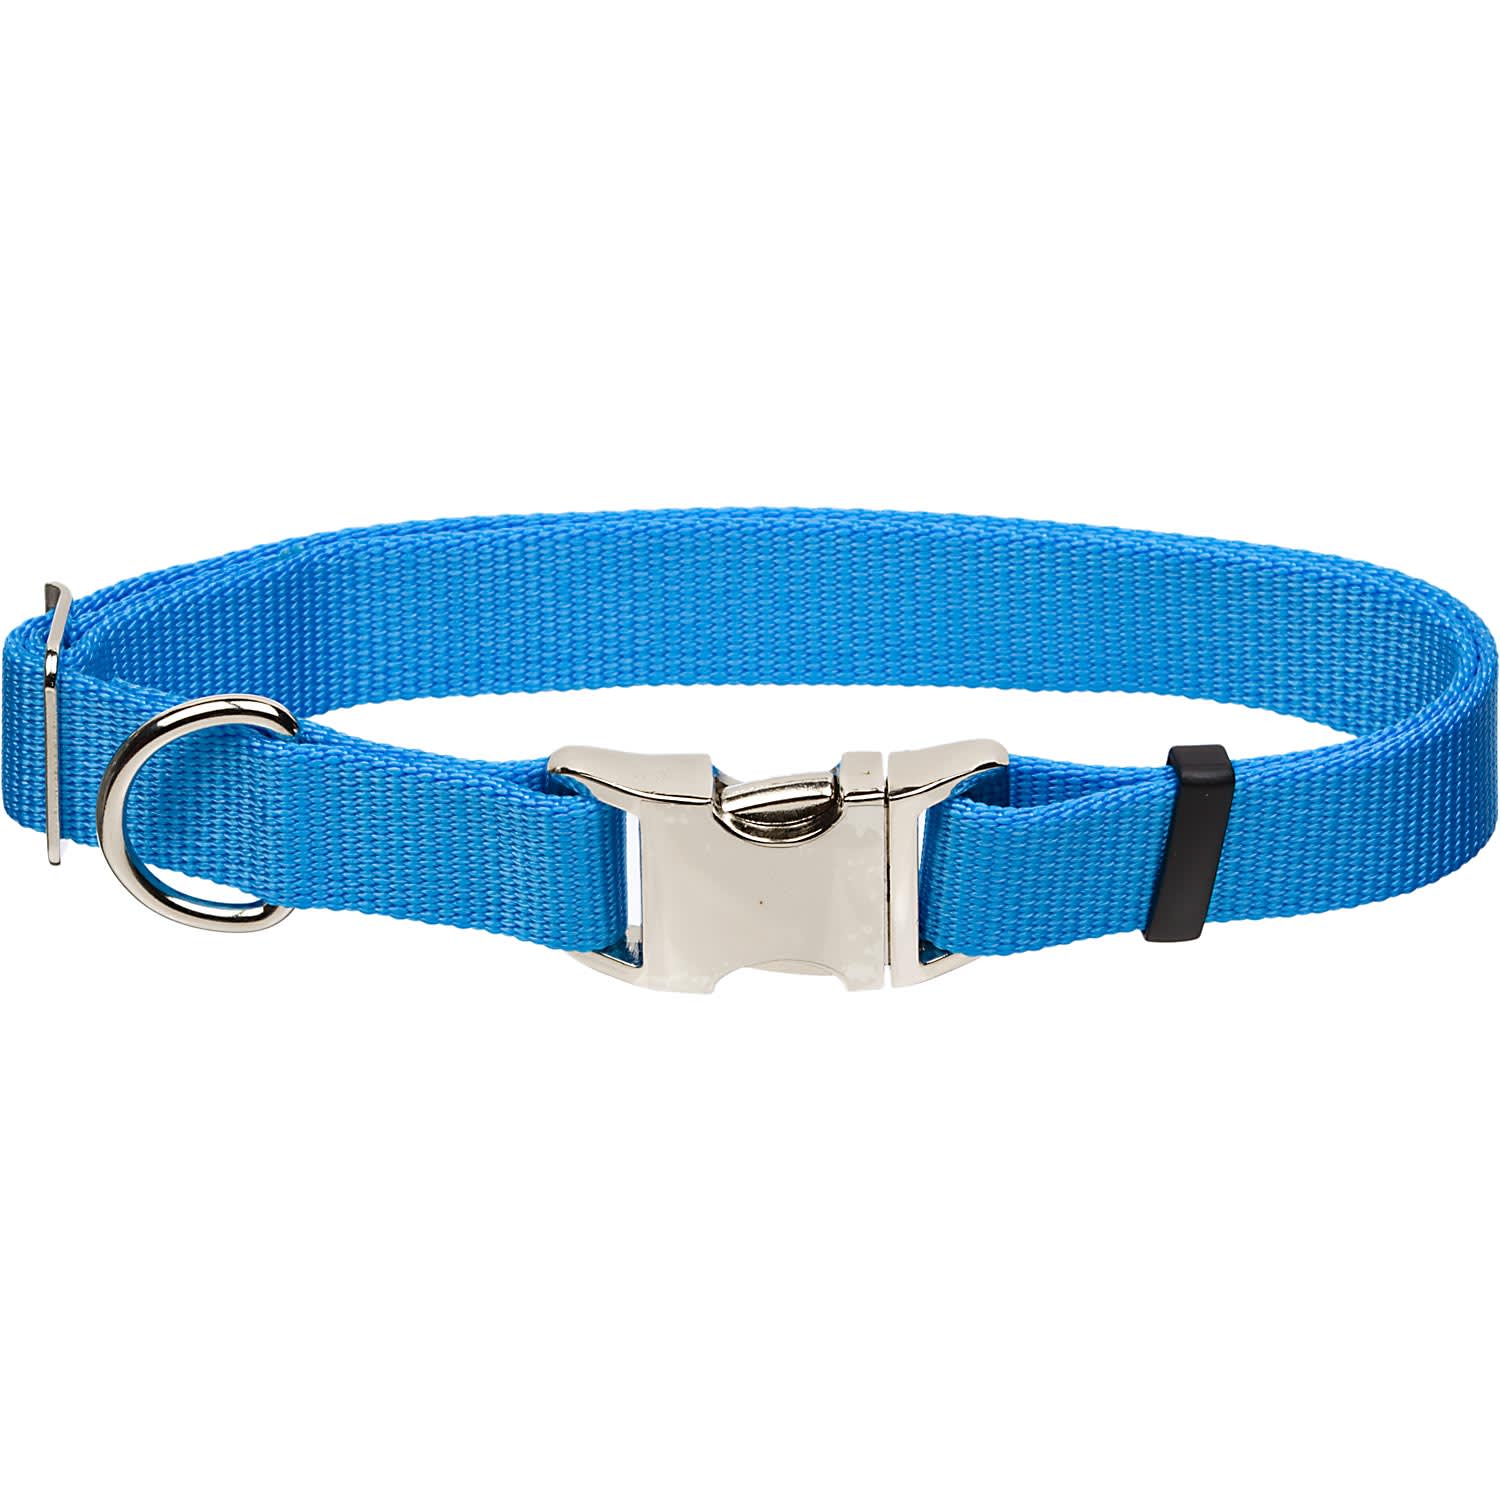 St. Louis Blues Dog Collar Personalized Metal and Plastic 